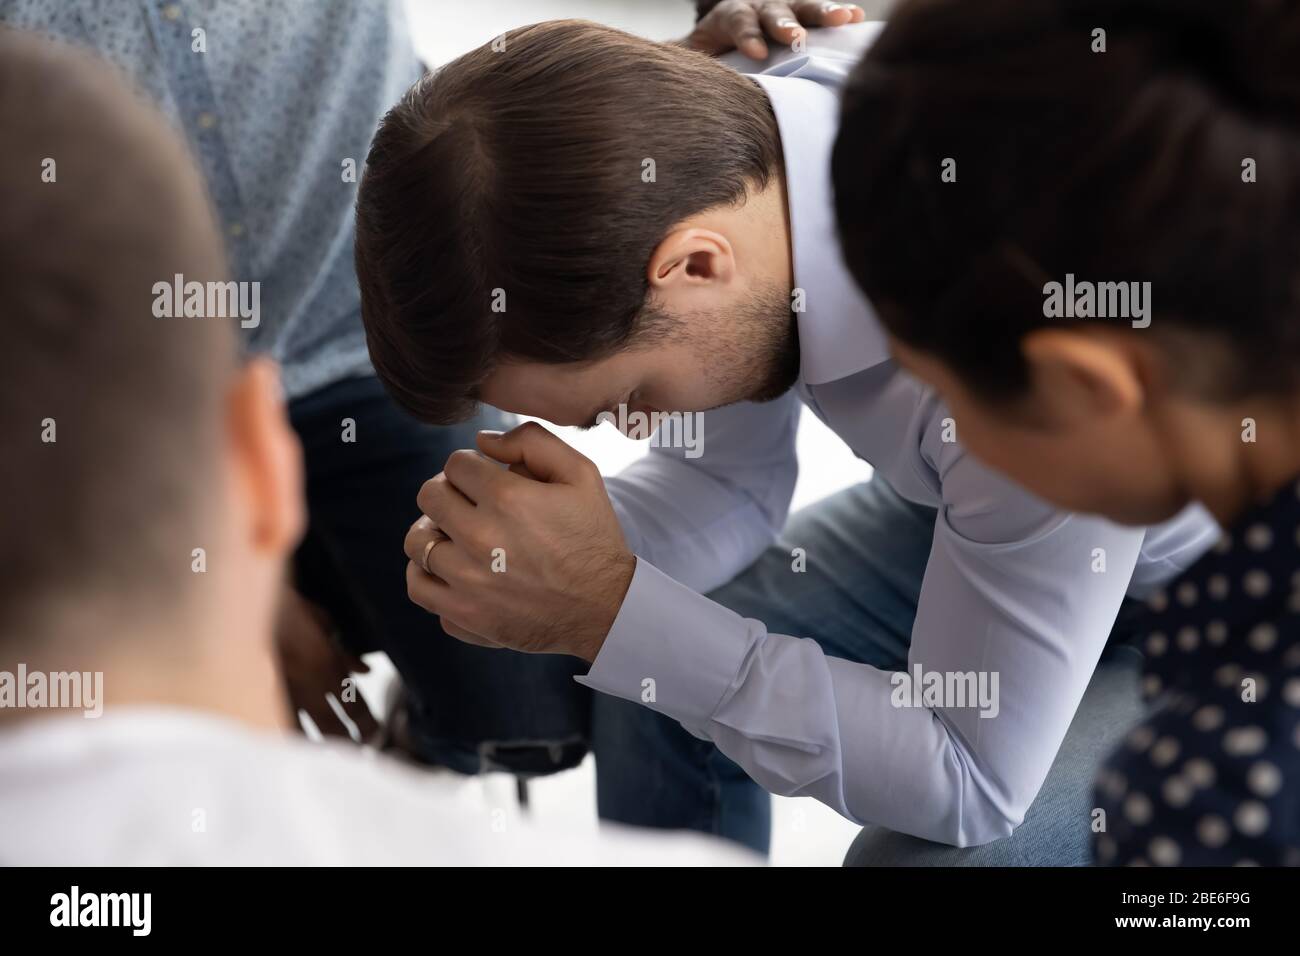 Diverse patients comfort depressed man at group therapy Stock Photo